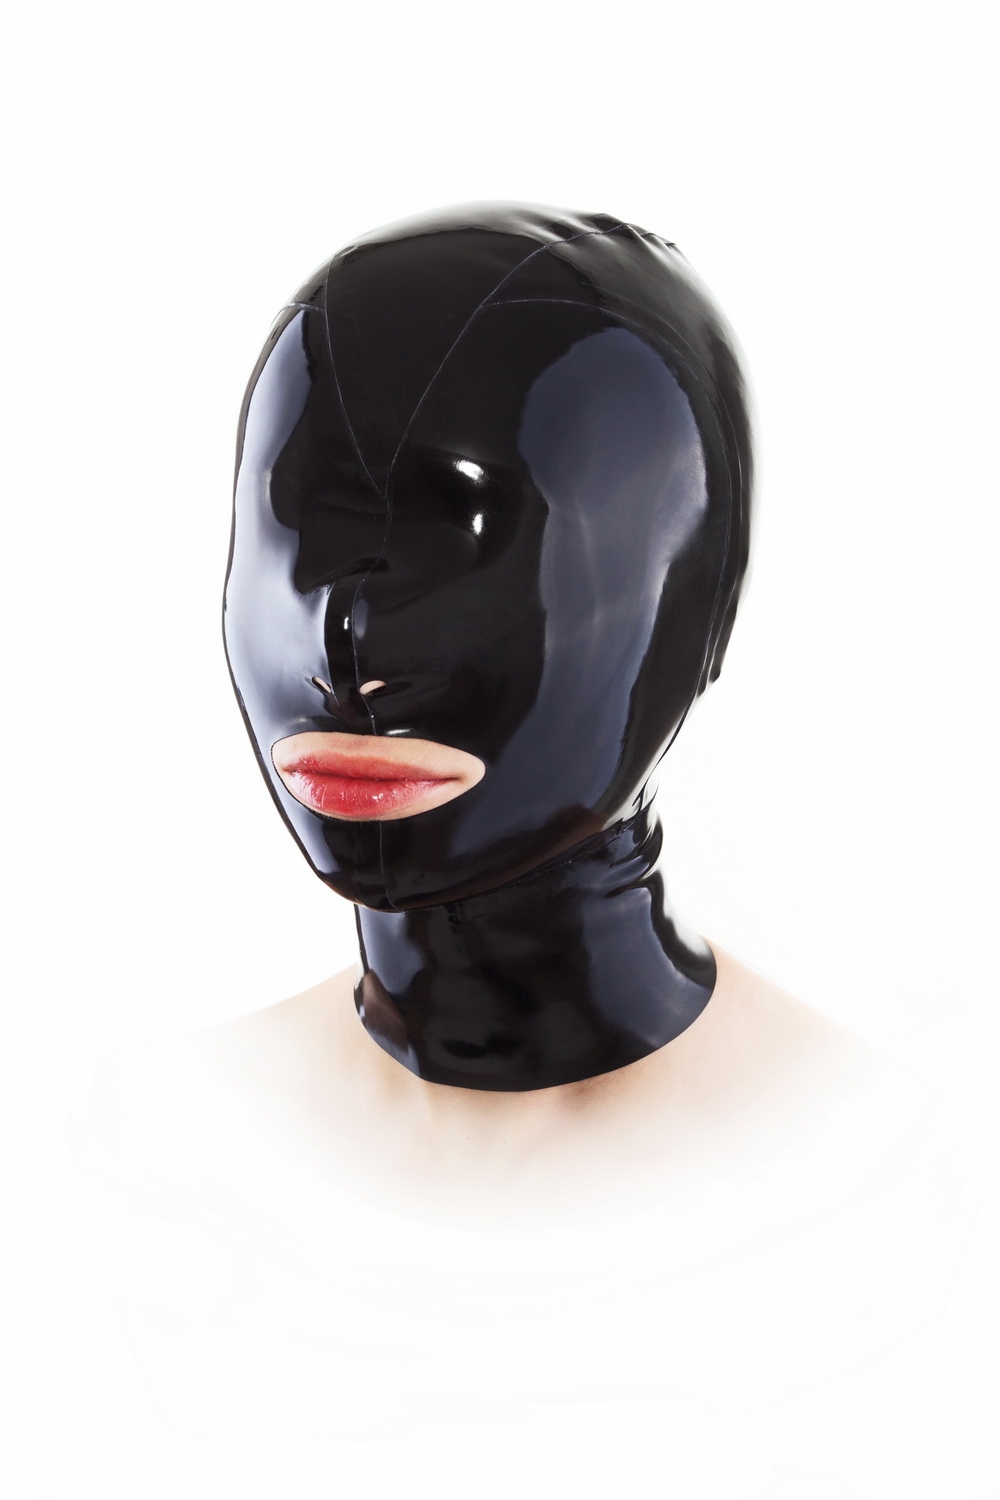           Latex Mask With Zipper